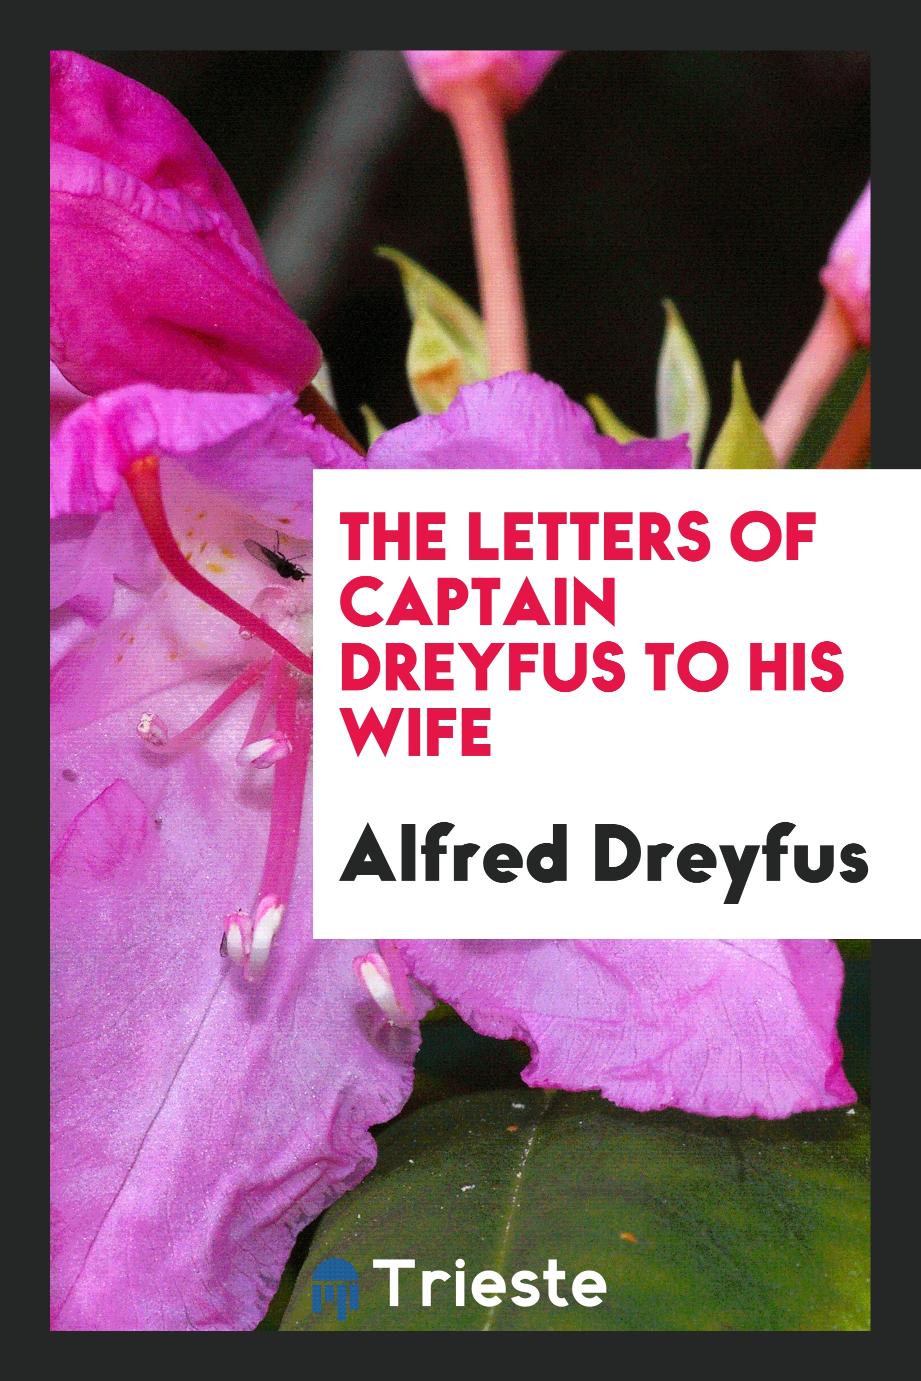 The letters of Captain Dreyfus to his wife